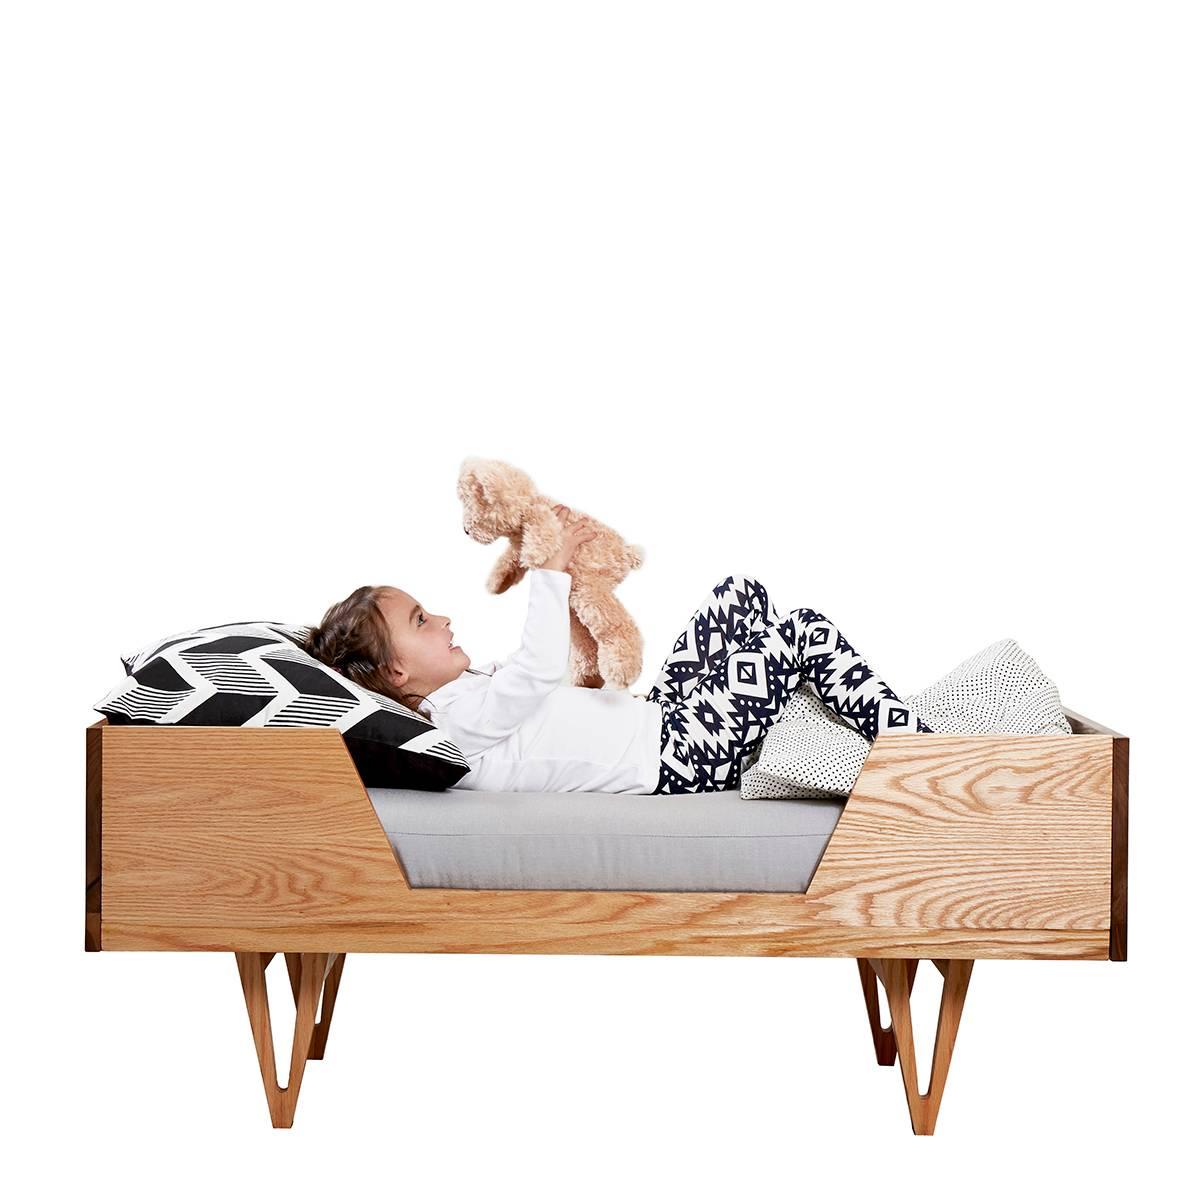 Harrison is a piece of furniture for life inspired by Mid-Century Modern design.  The Harrison  toddler bed is a transitional bed and can be used up until roughly 5-6 years old. Thereafter it can be converted into a daybed with the addition of the